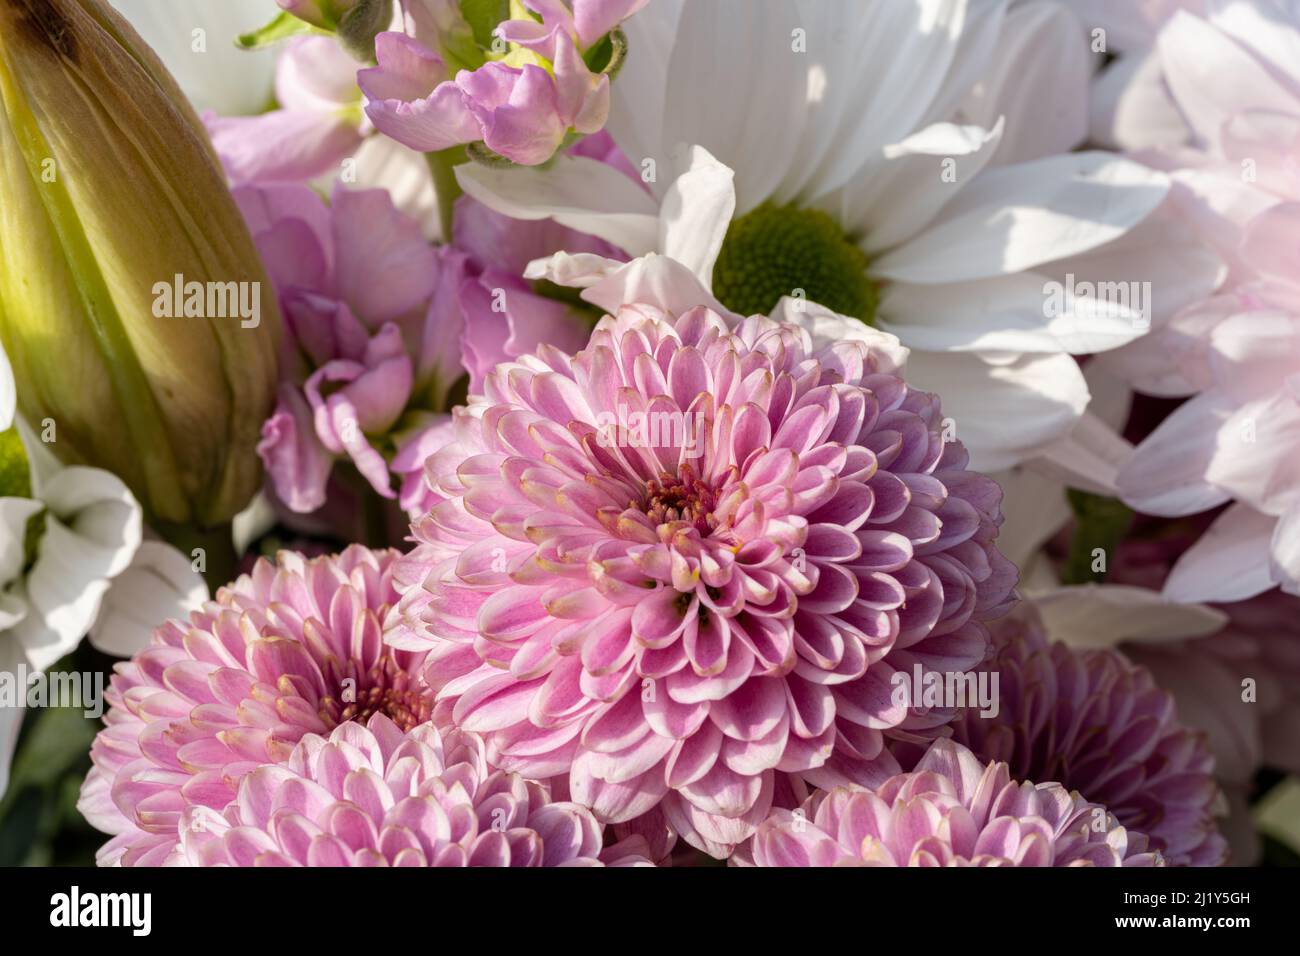 Pink Chrysanthemum flowers in bloom with a shallow depth of field. Stock Photo